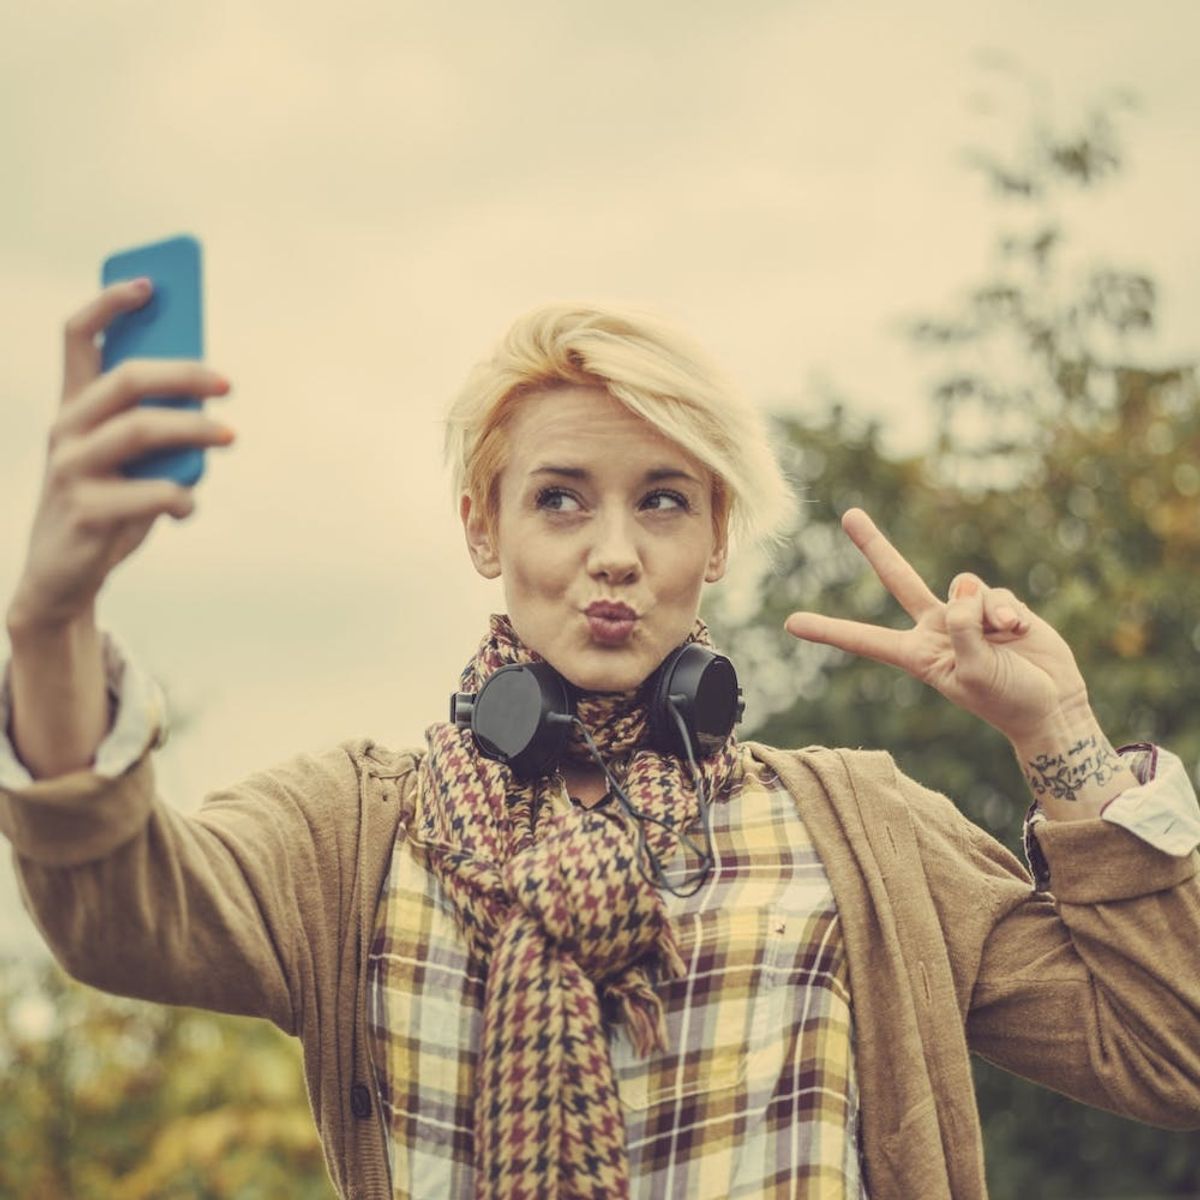 MasterCard Plans to Make Your Selfie Your Password